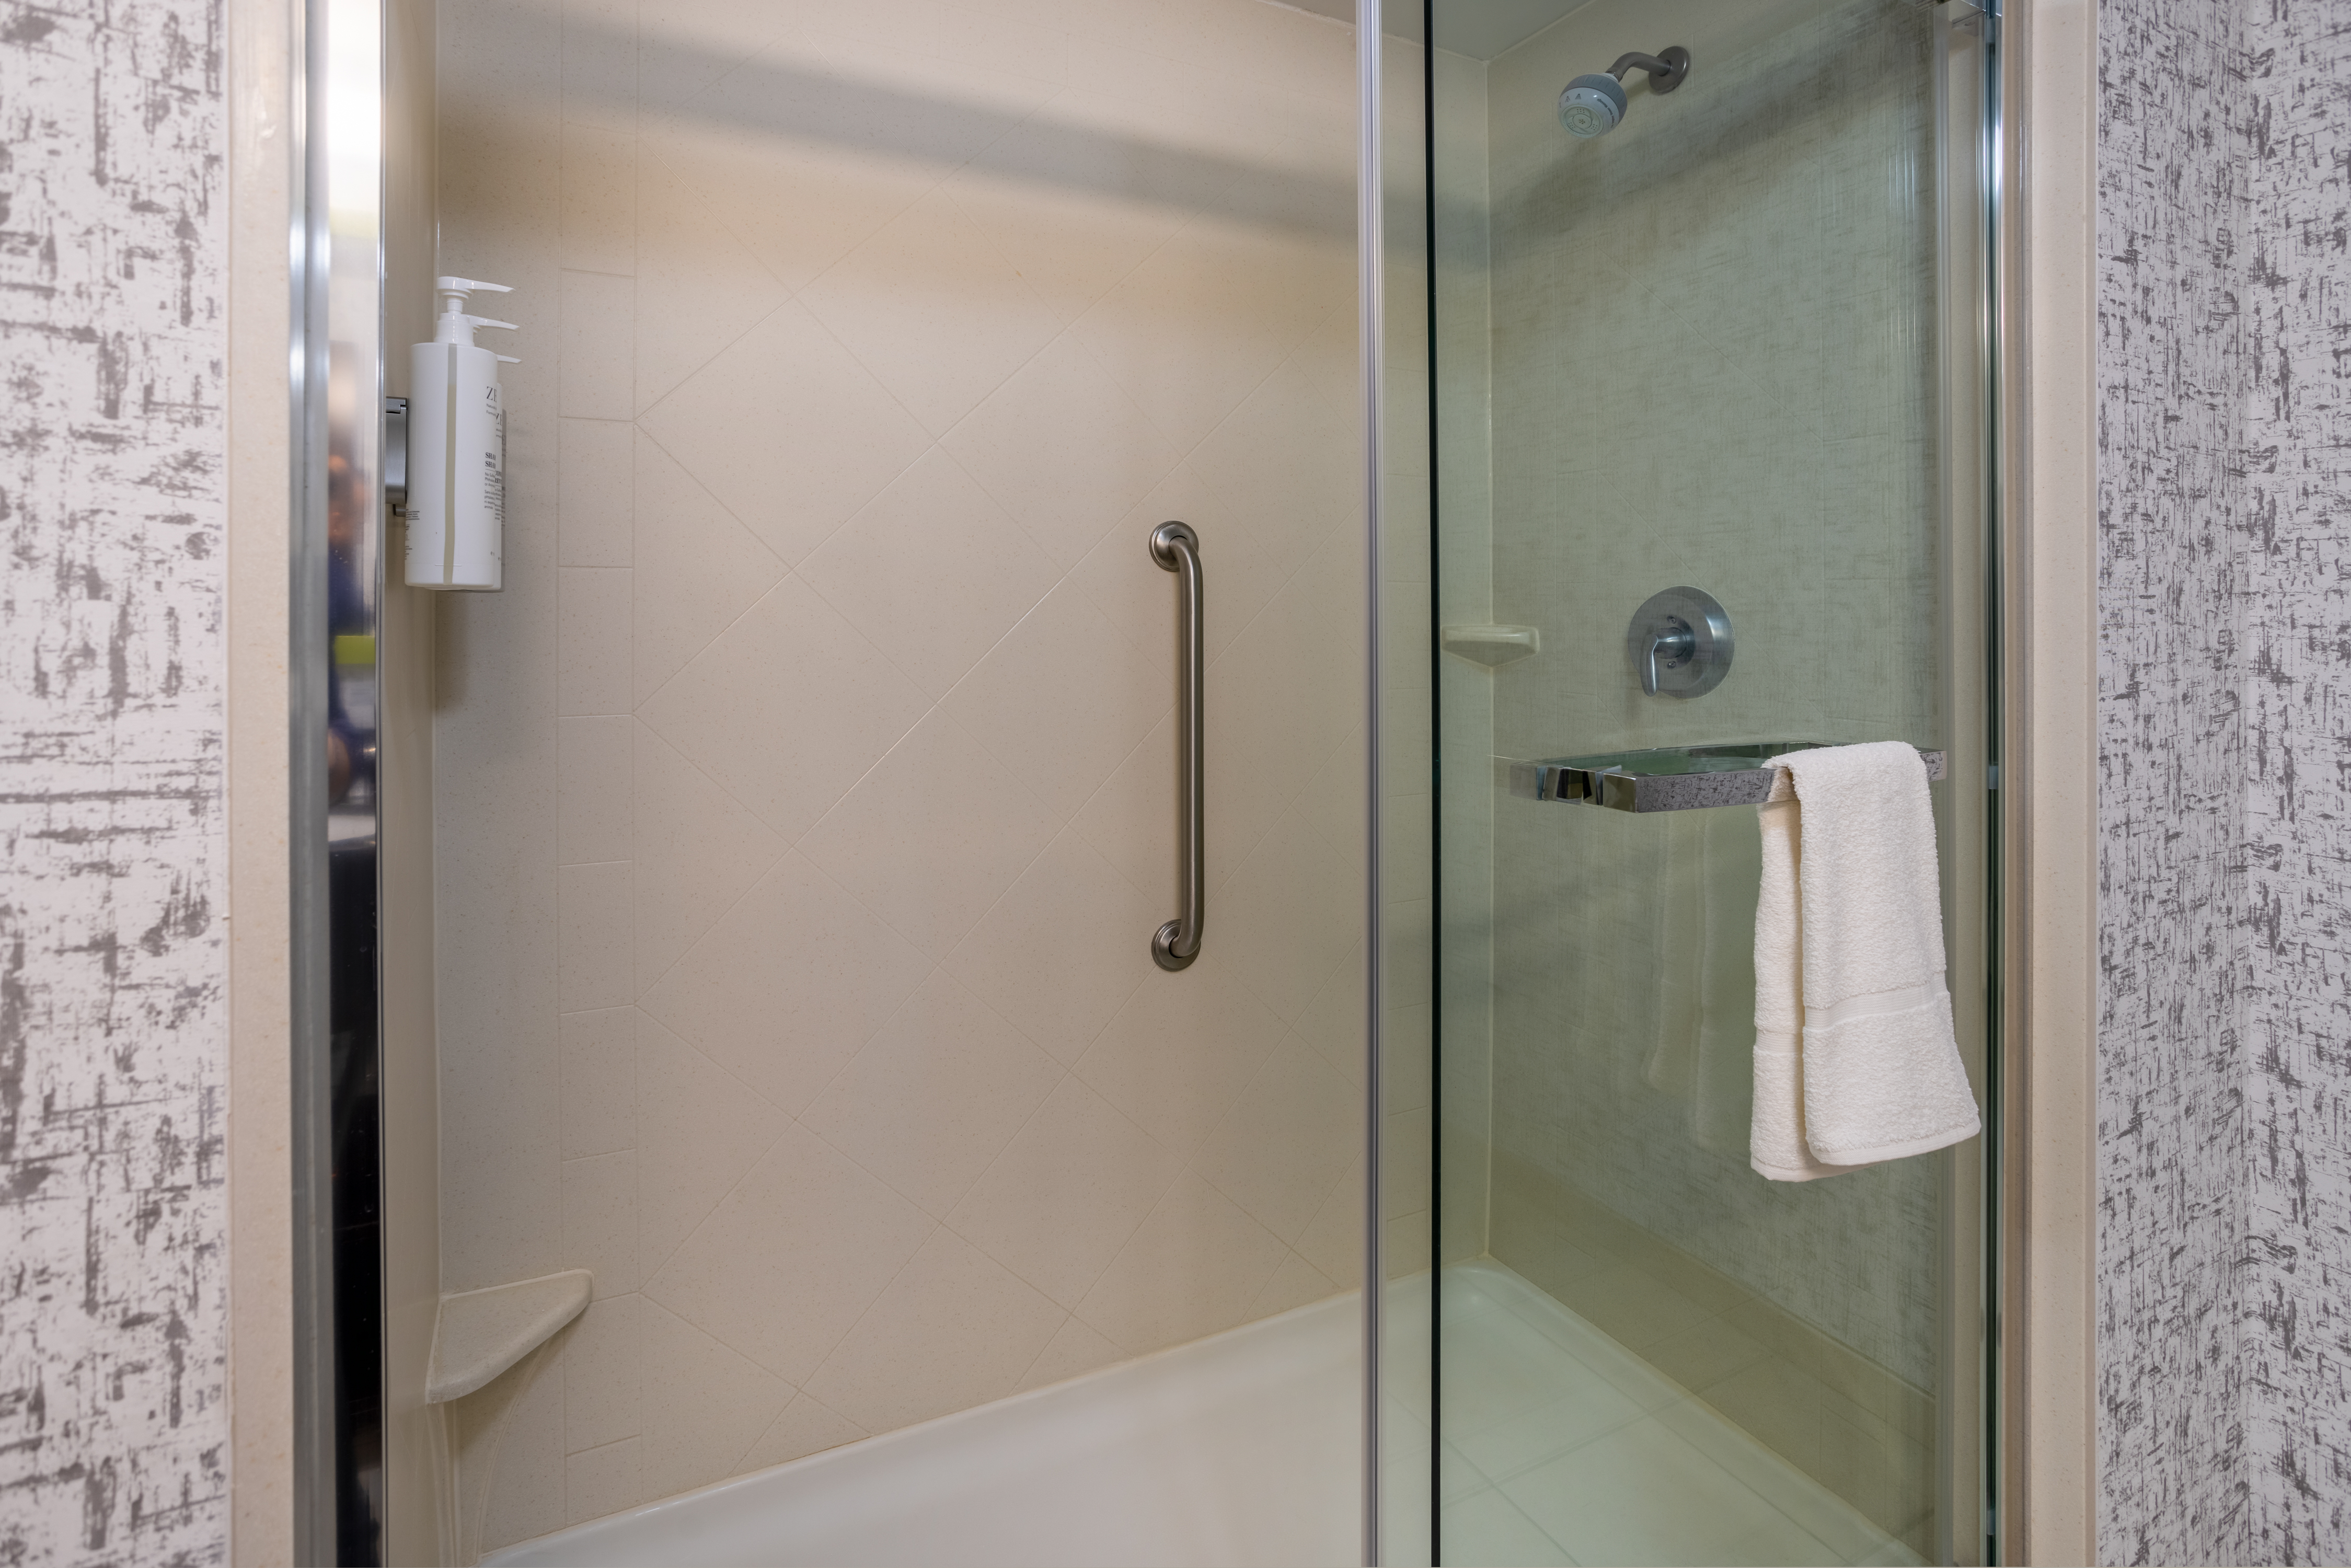 Large, glass walled showers